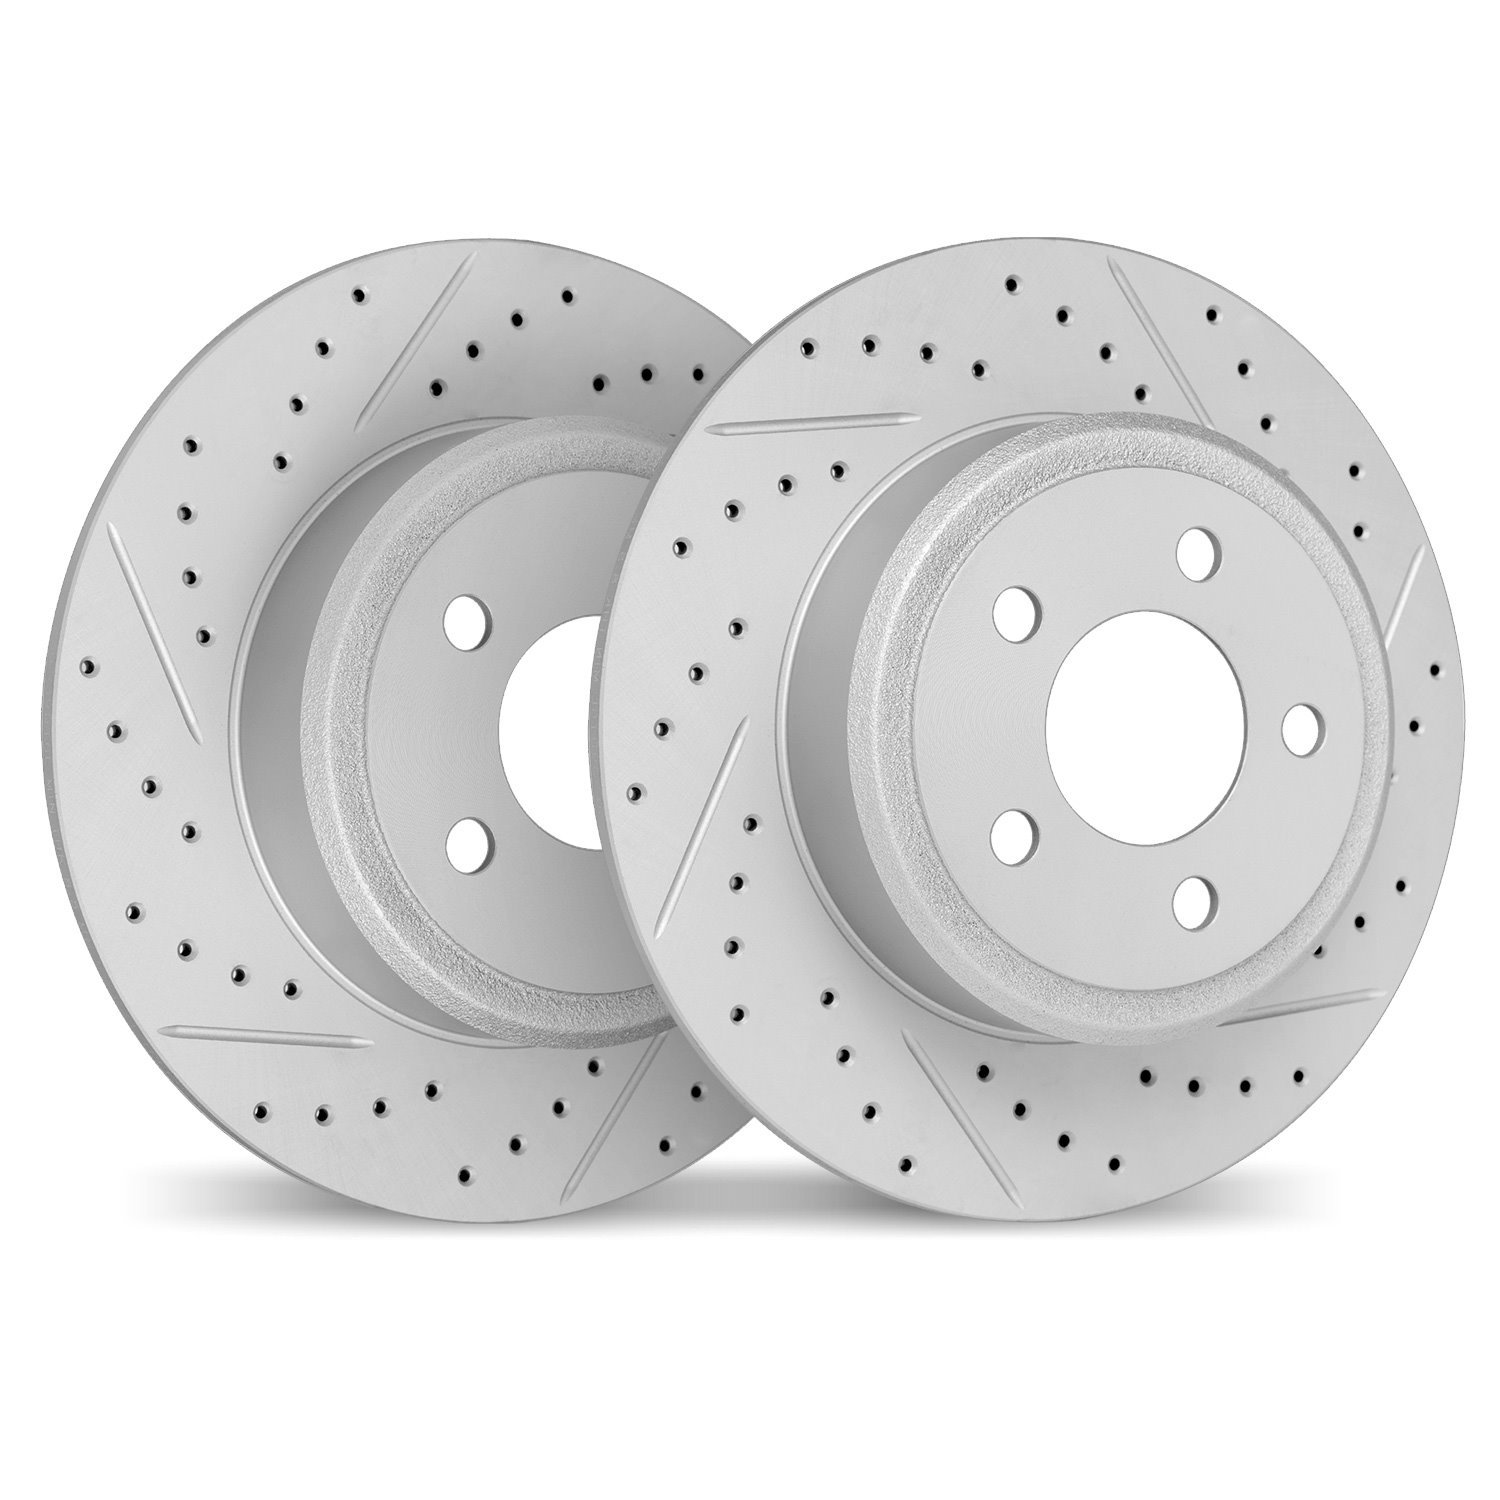 2002-45015 Geoperformance Drilled/Slotted Brake Rotors, 2016-2018 GM, Position: Rear